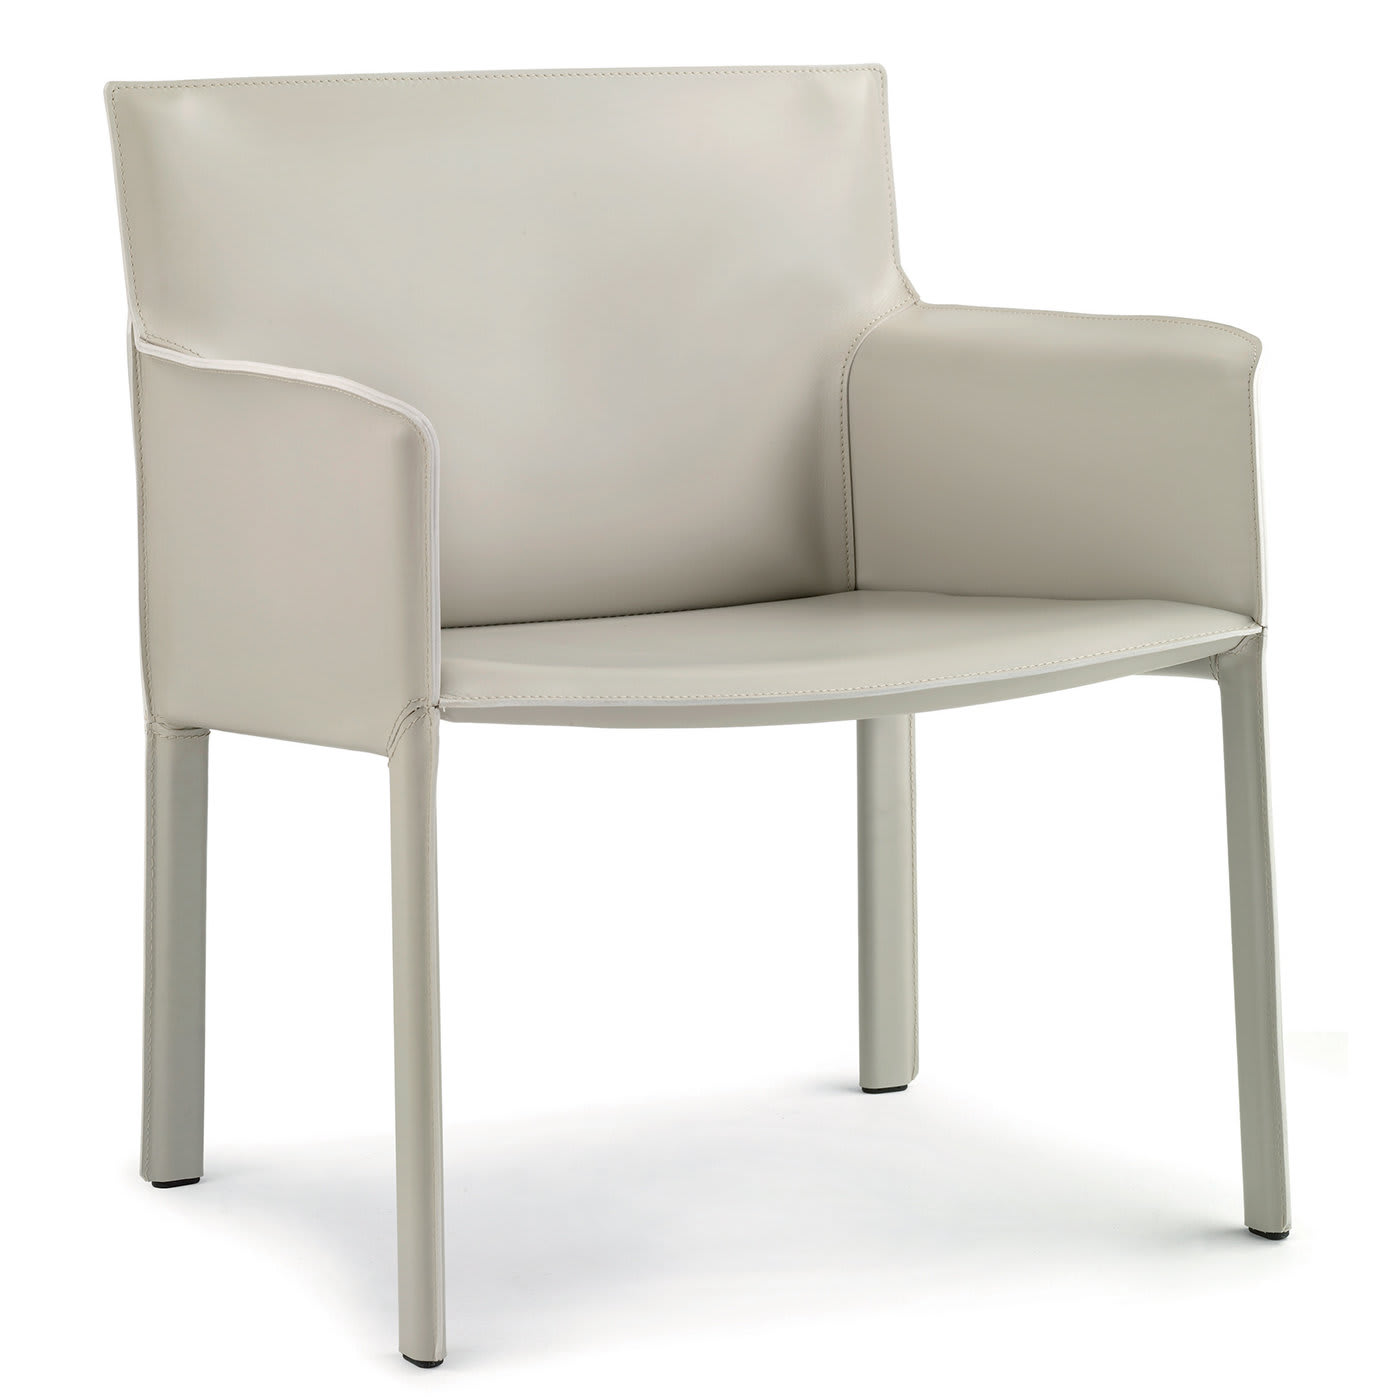 Pasqualina Relax Armchair by Grassi&Bianchi - Enrico Pellizzoni